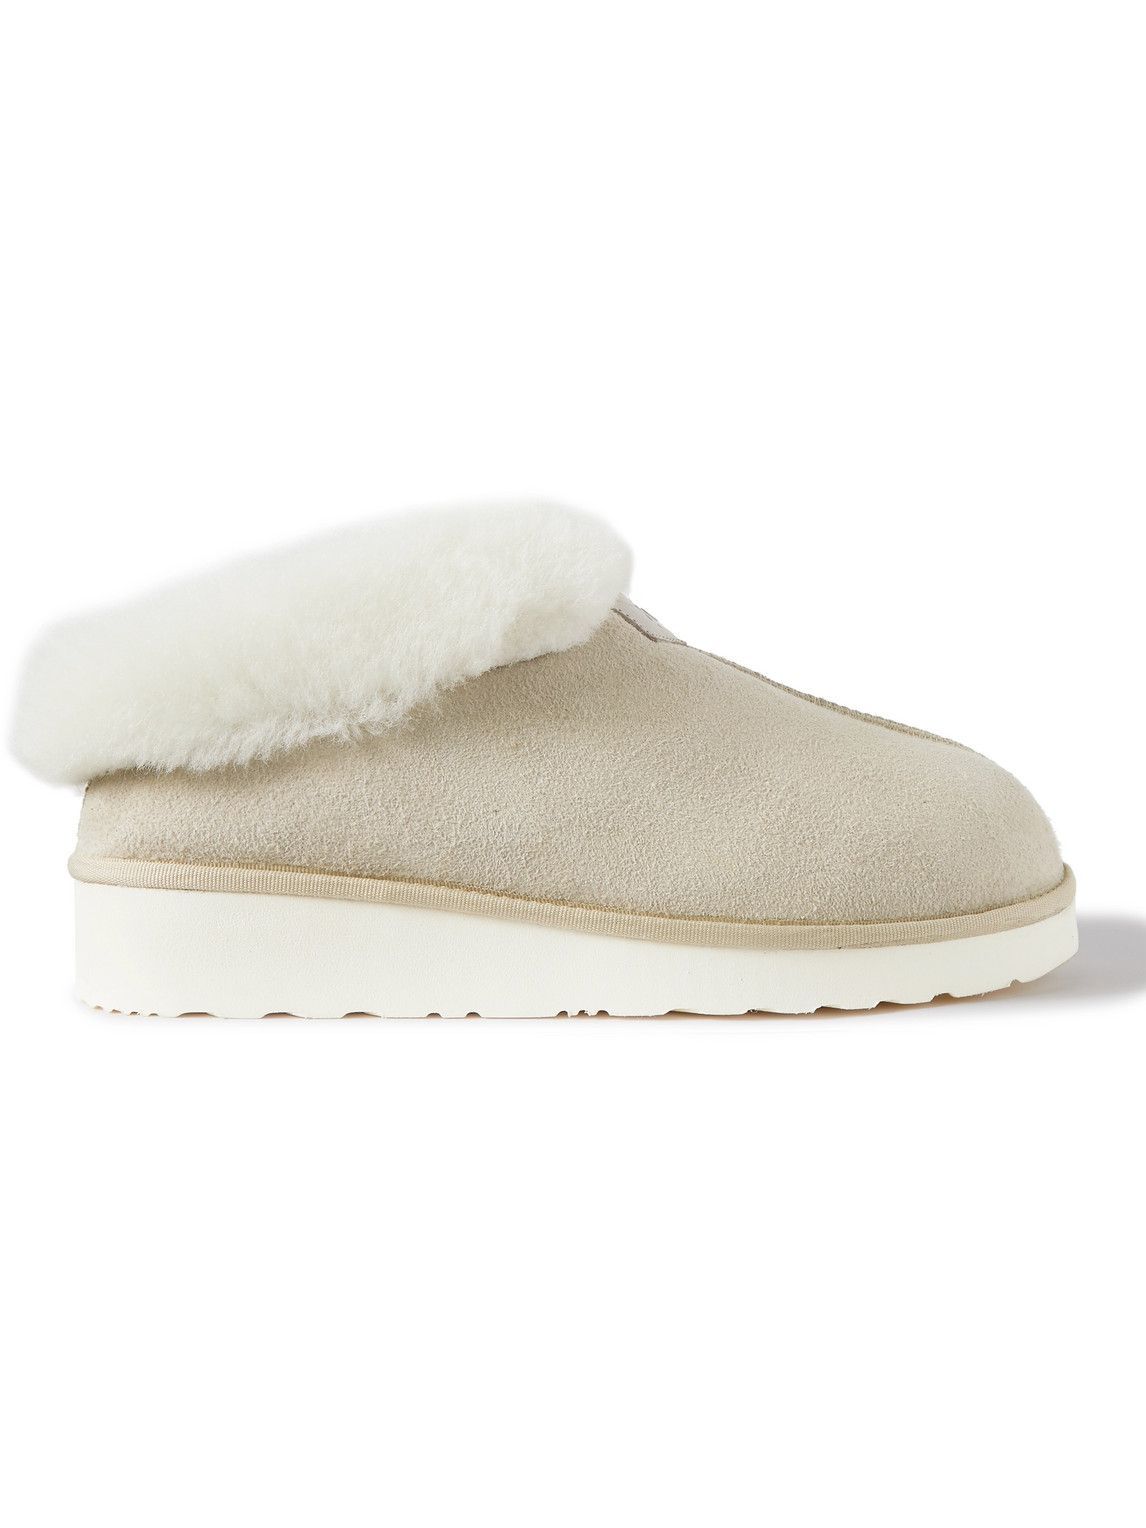 Photo: Grenson - Wyeth Shearling-Lined Suede Slippers - Neutrals